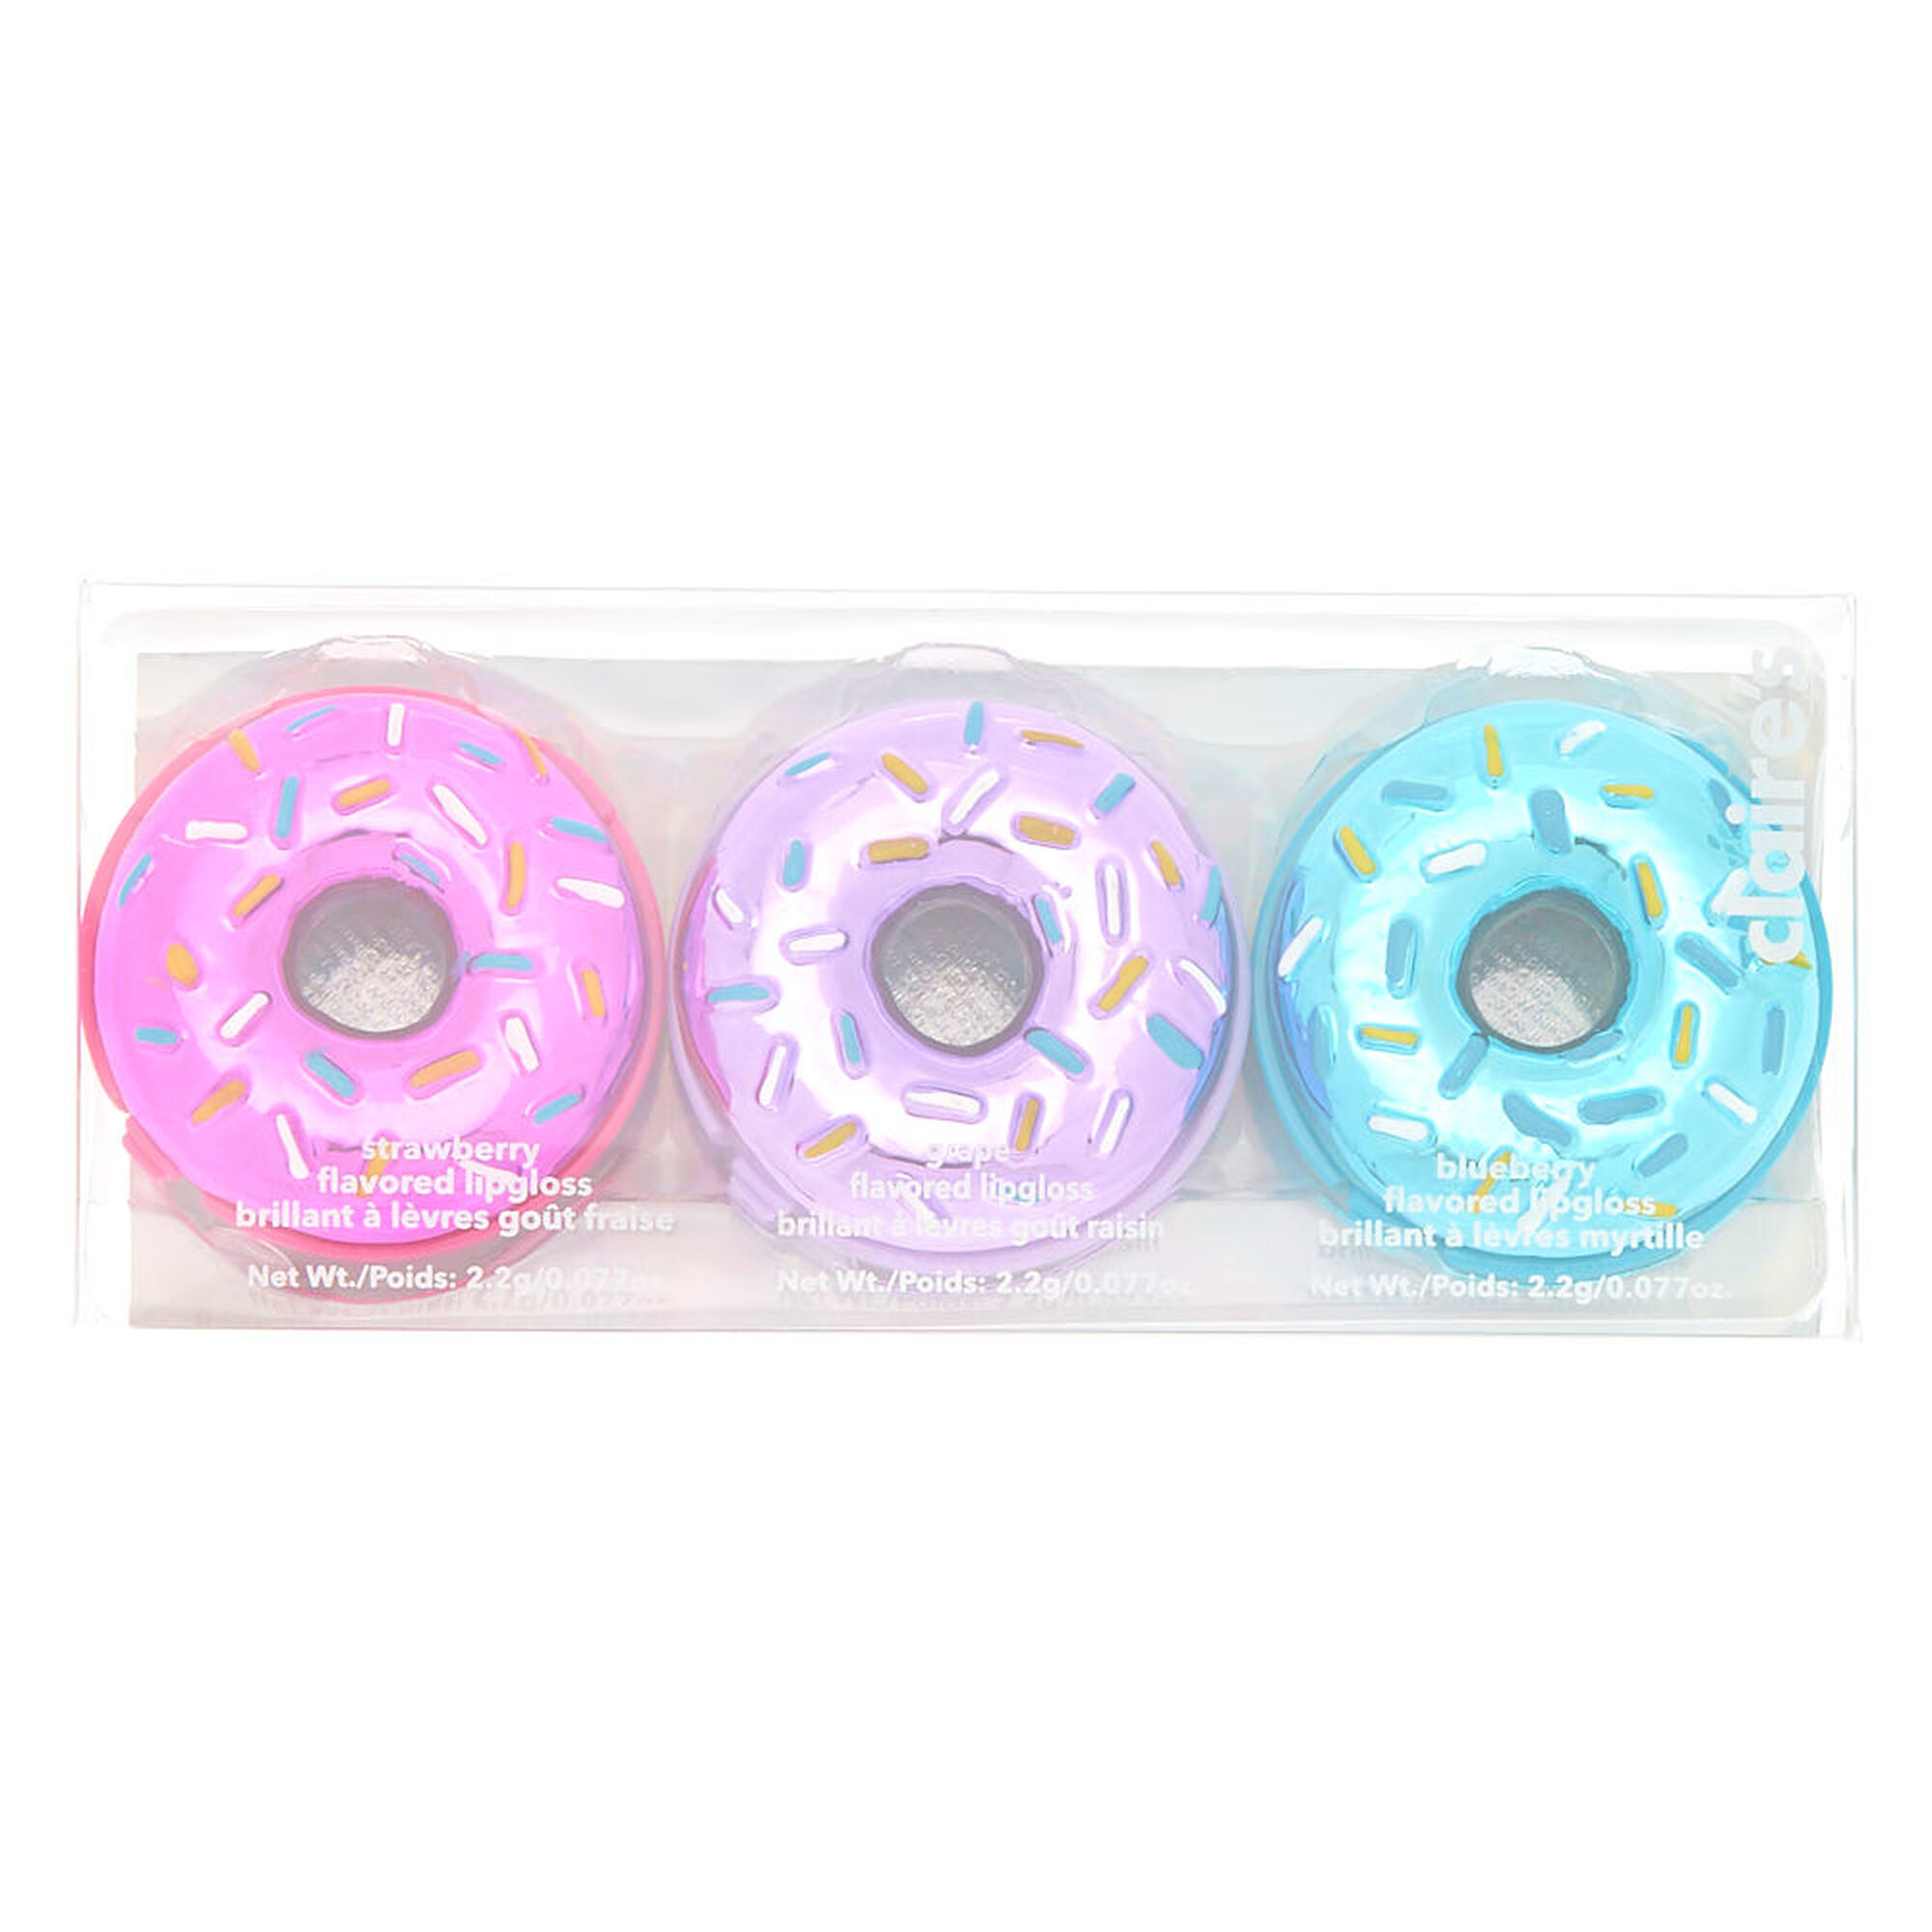 Flavored Donut Lip Gloss Set 3 Pack Claire S Us